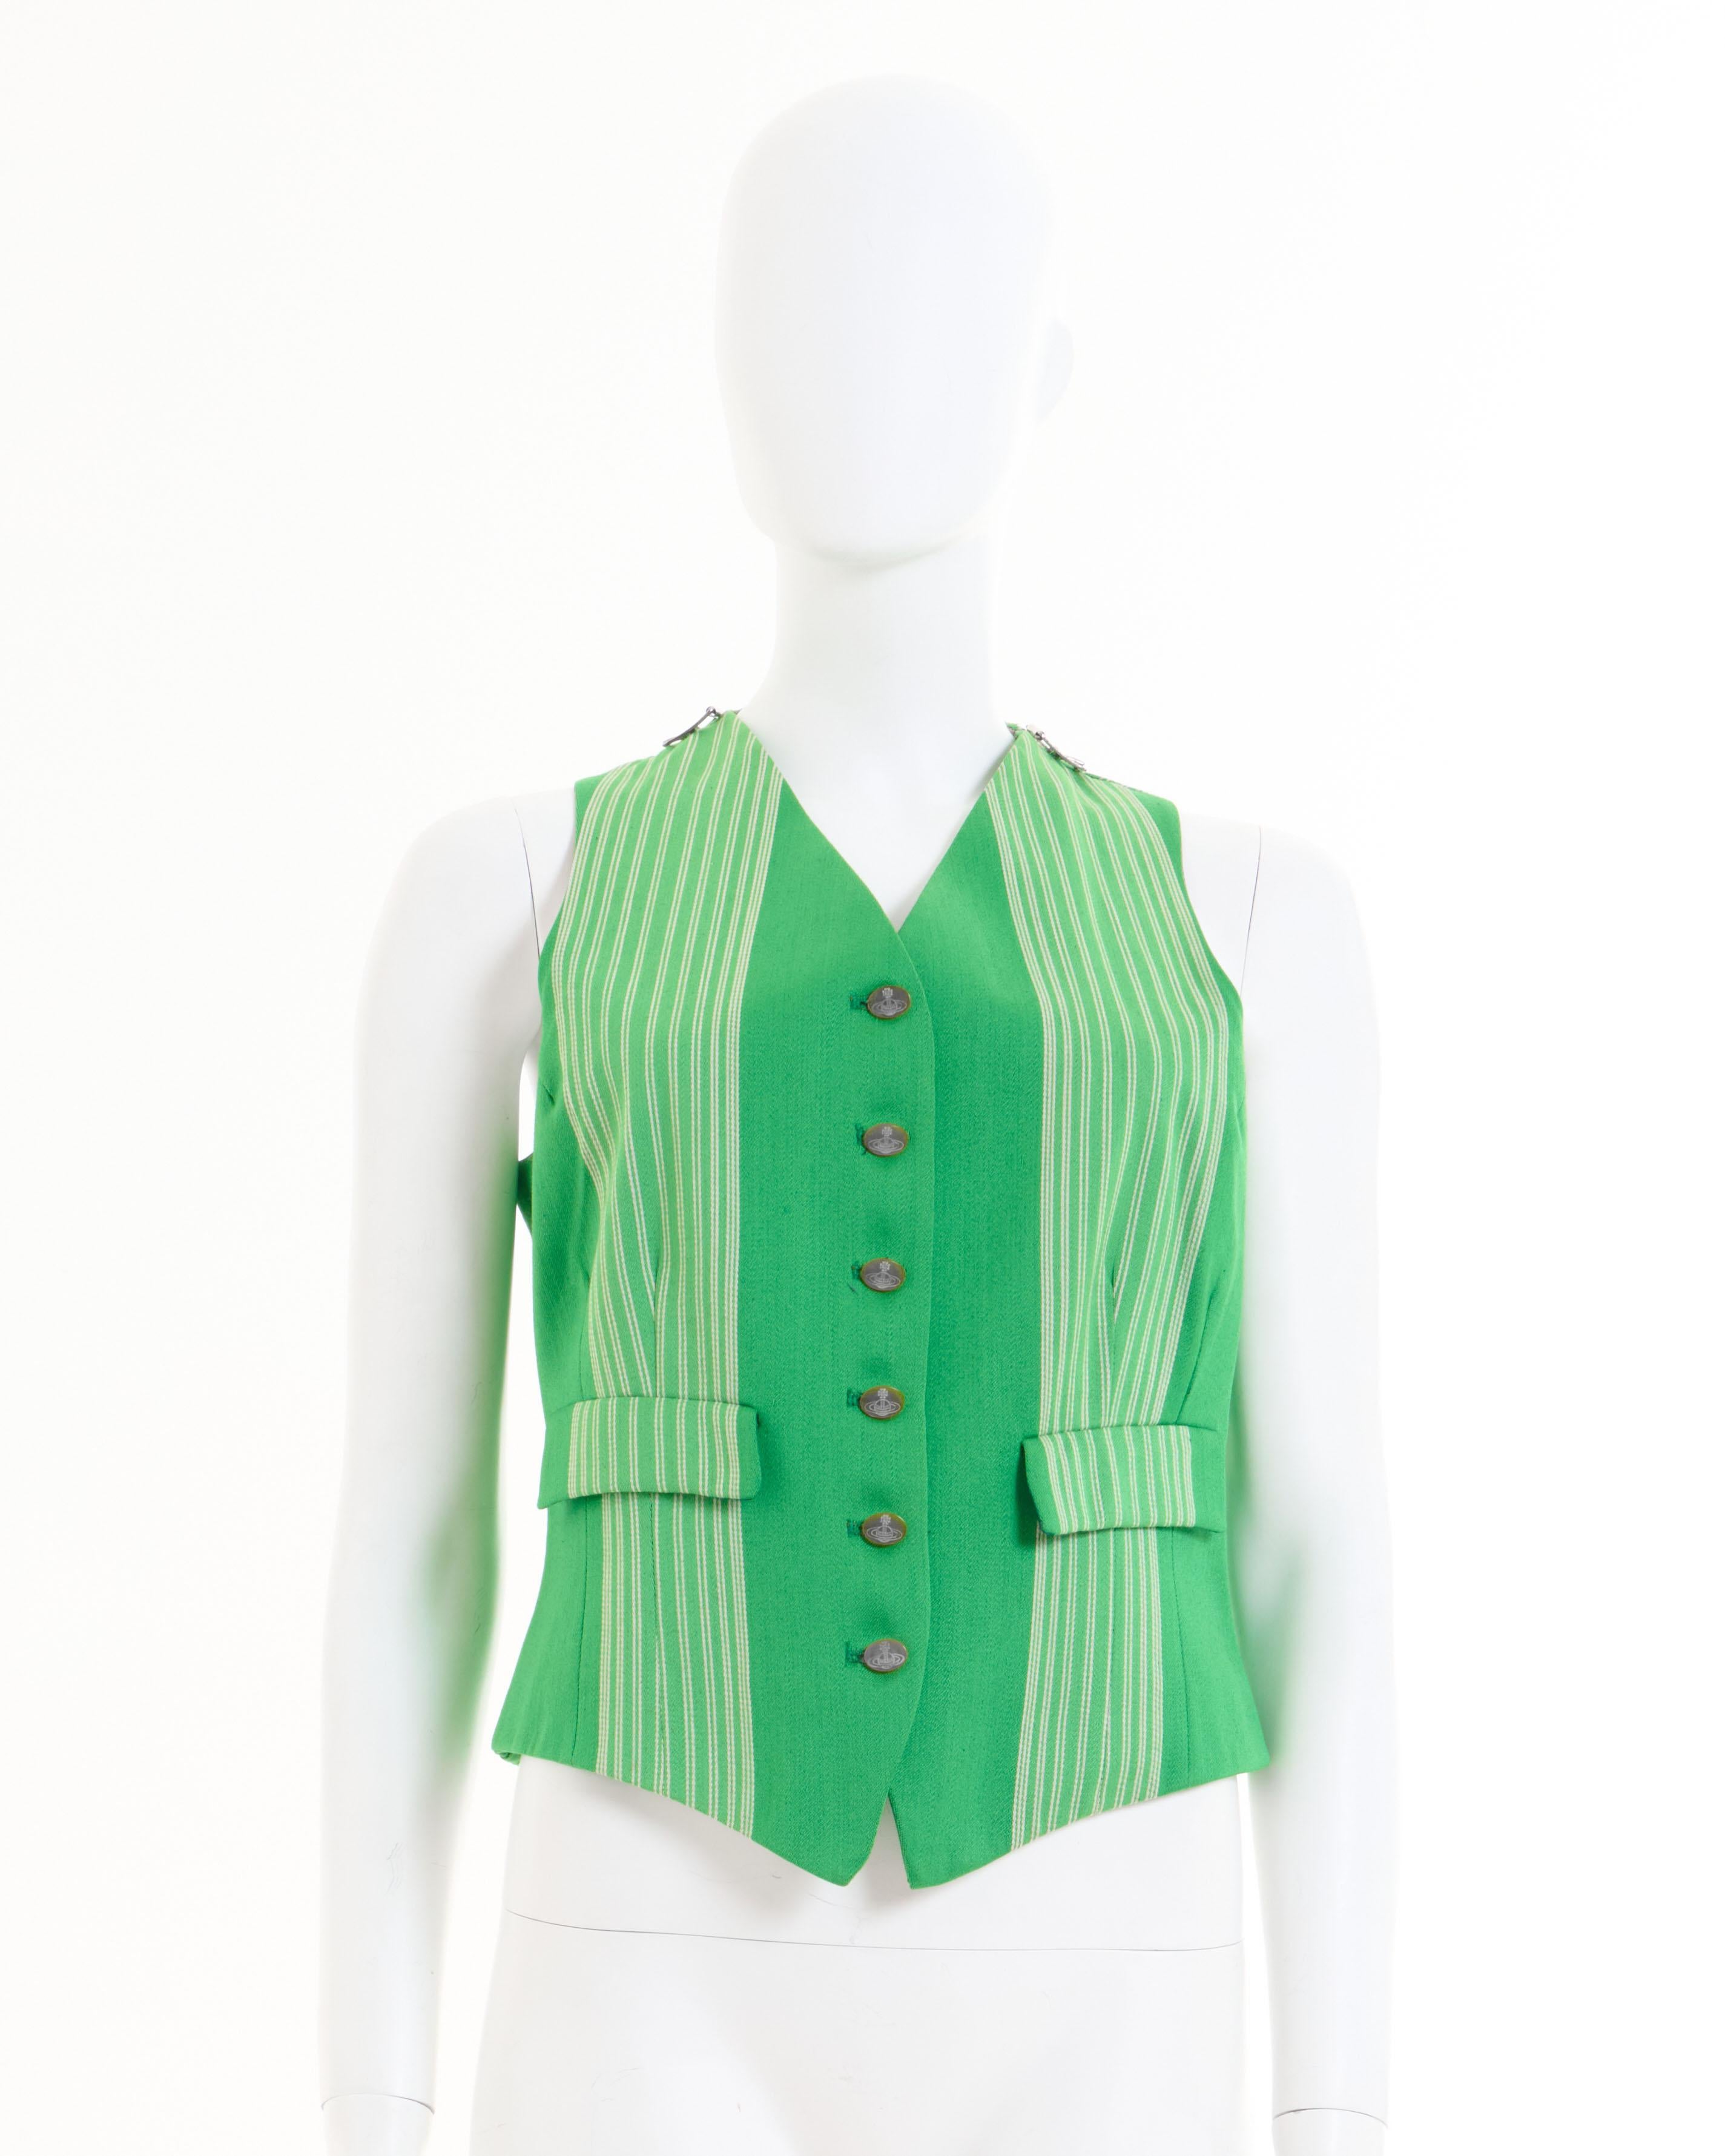 Vivienne Westwood  F/W 1988/89 ‘Time Machine’ Green striped Armour jacket For Sale 10